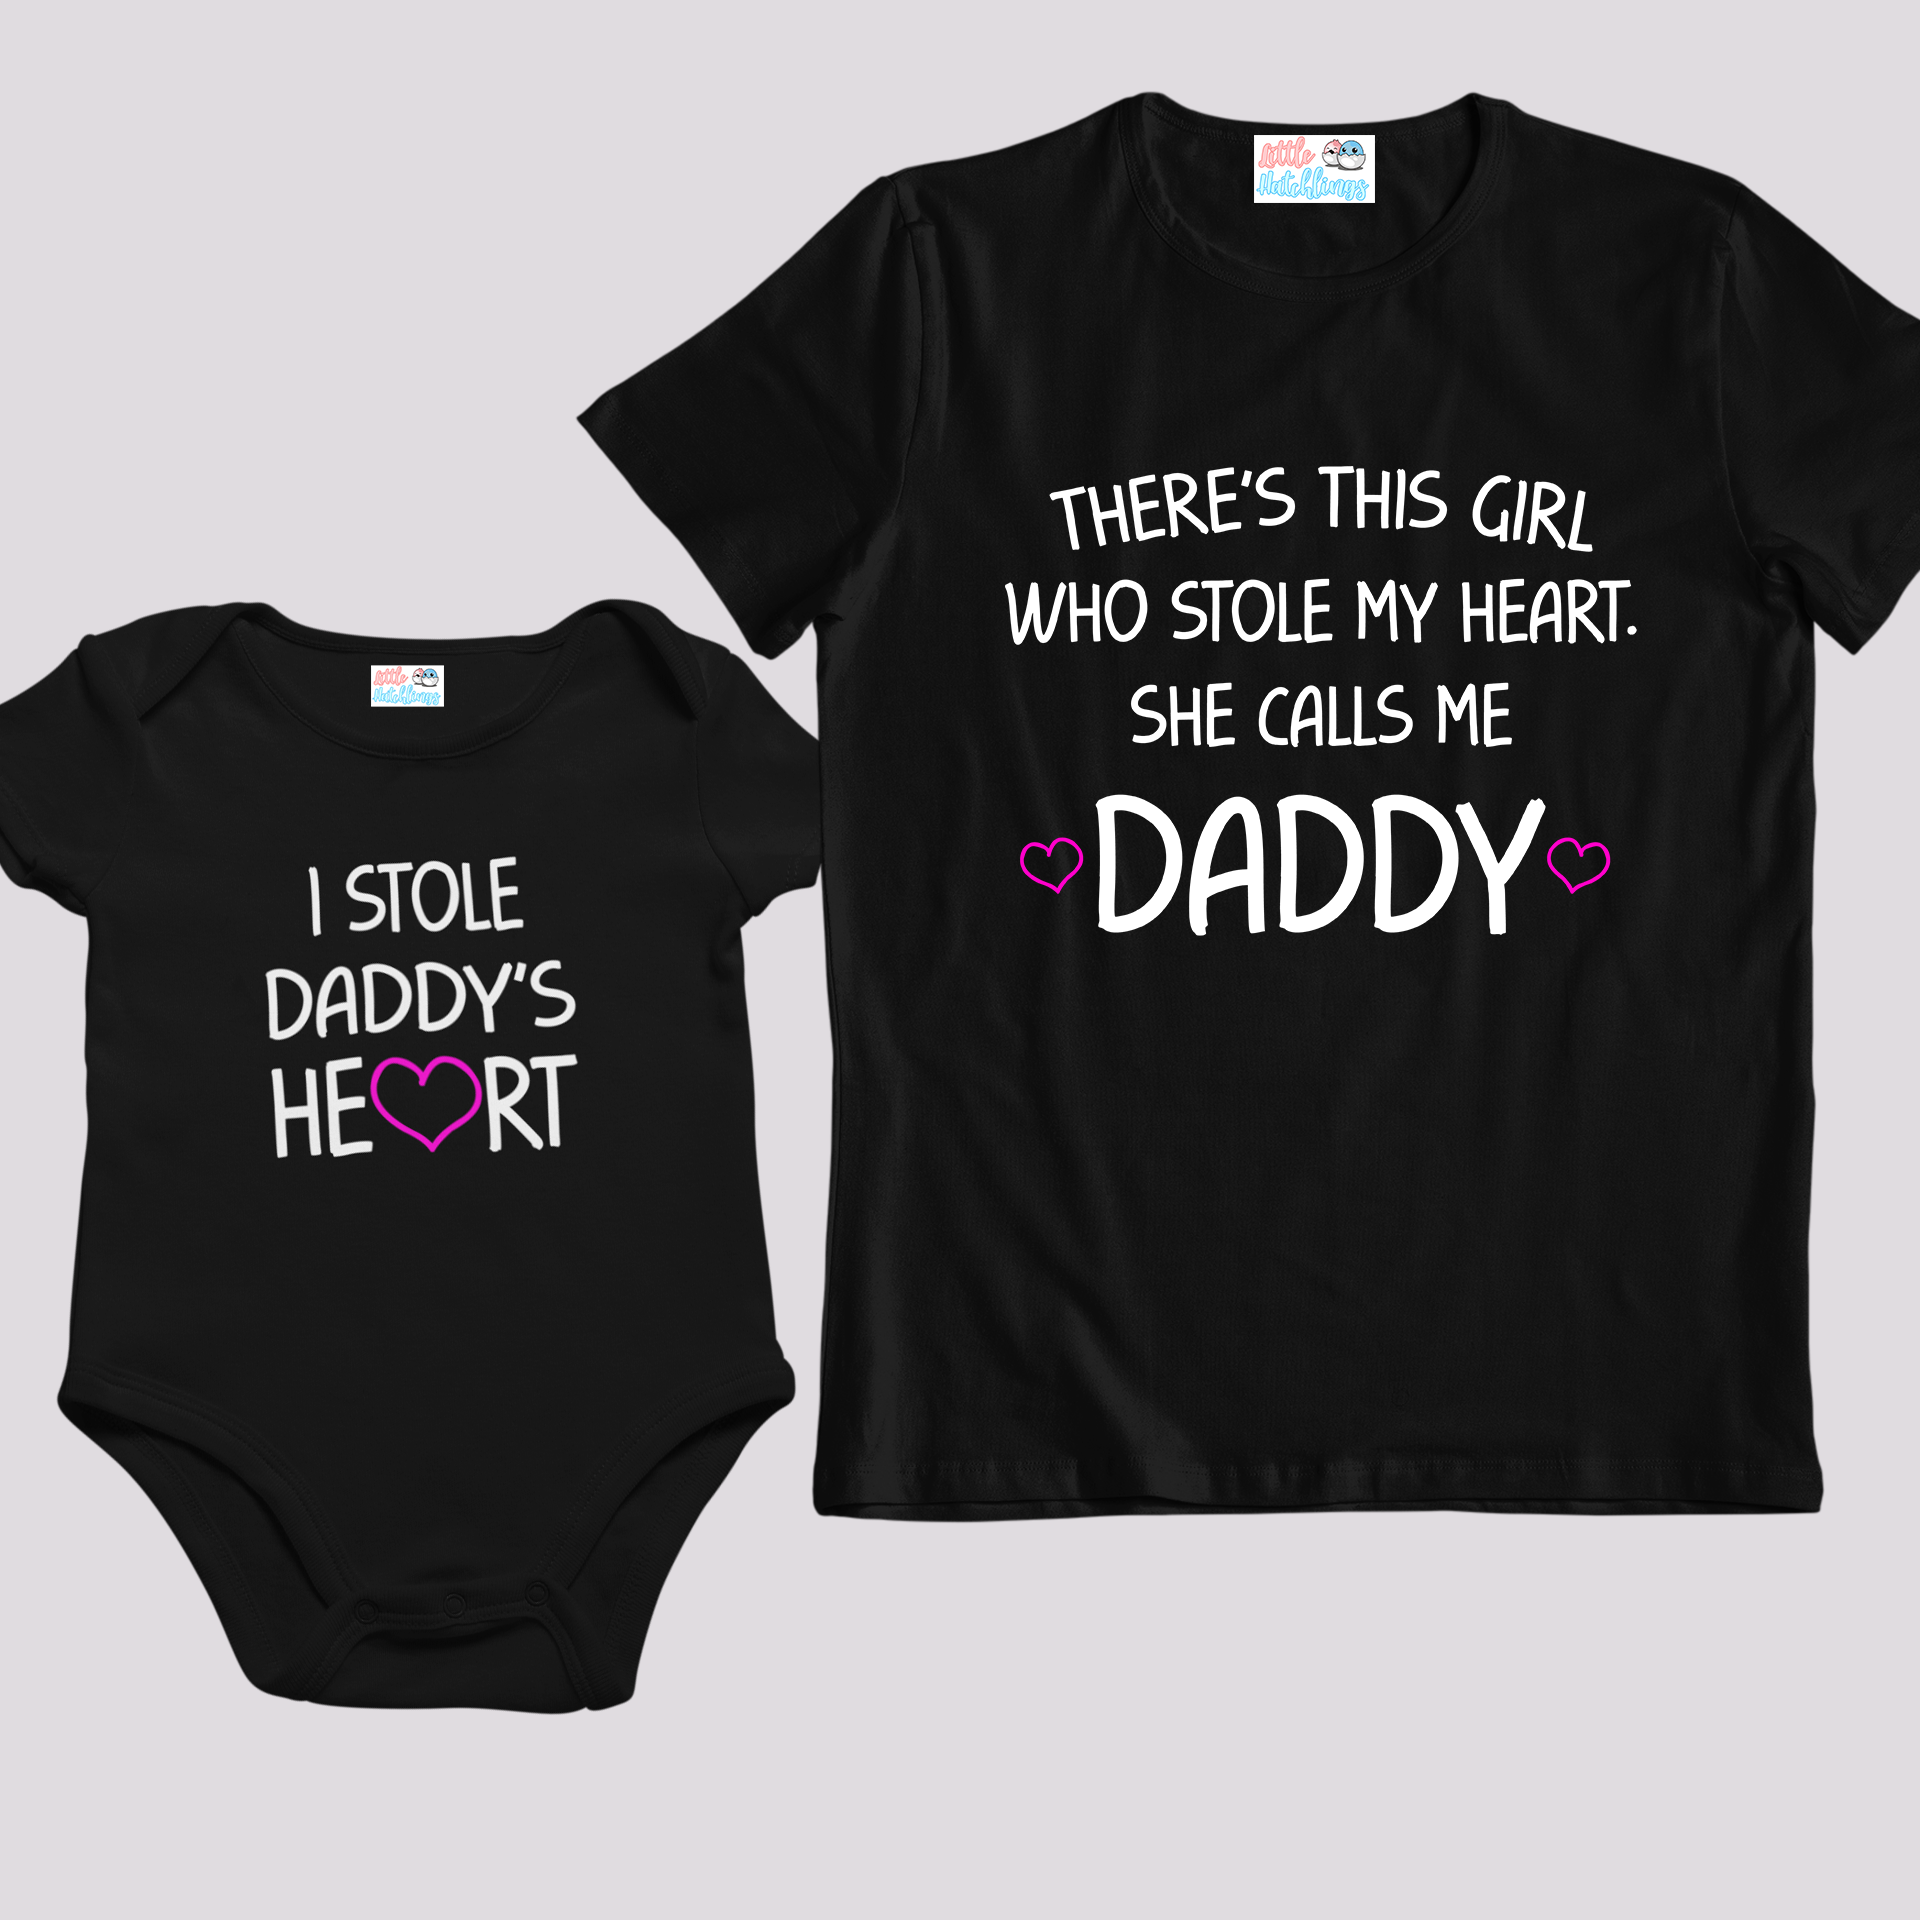 I Stole Daddy's Heart Black Combo - Onesie + Adult T-shirt